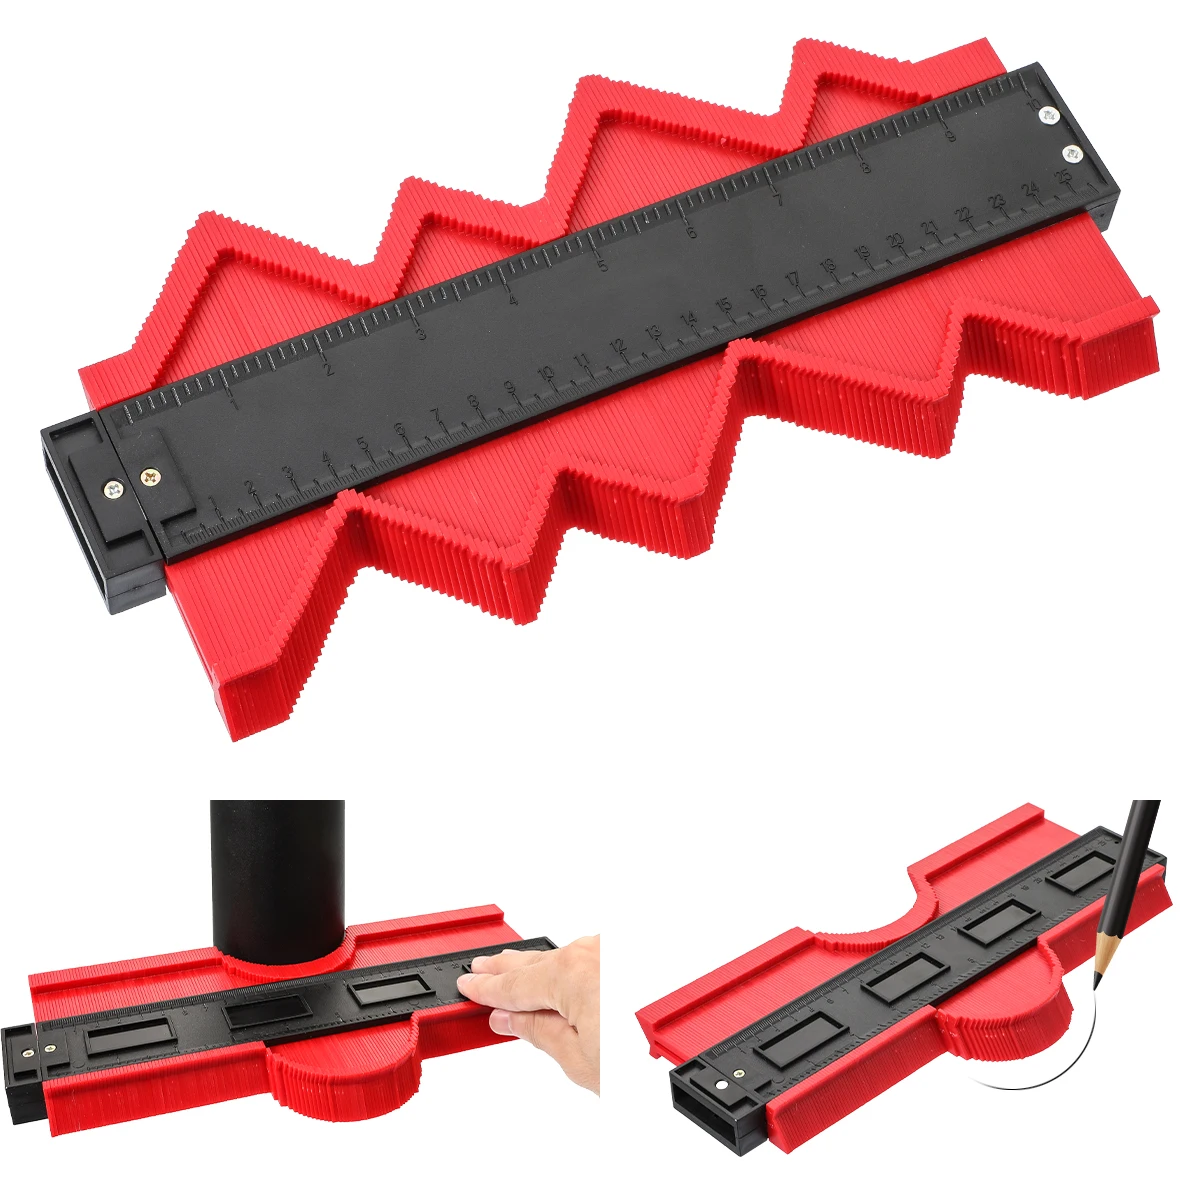 10 Inch Widen-Red Contour Gauge 10 Inch Widen Plastic Profile Gauge Duplicator Precisely Copy Irregular Shapes Wood Template Measuring Tool for Perfect Fit and Easy Cutting 